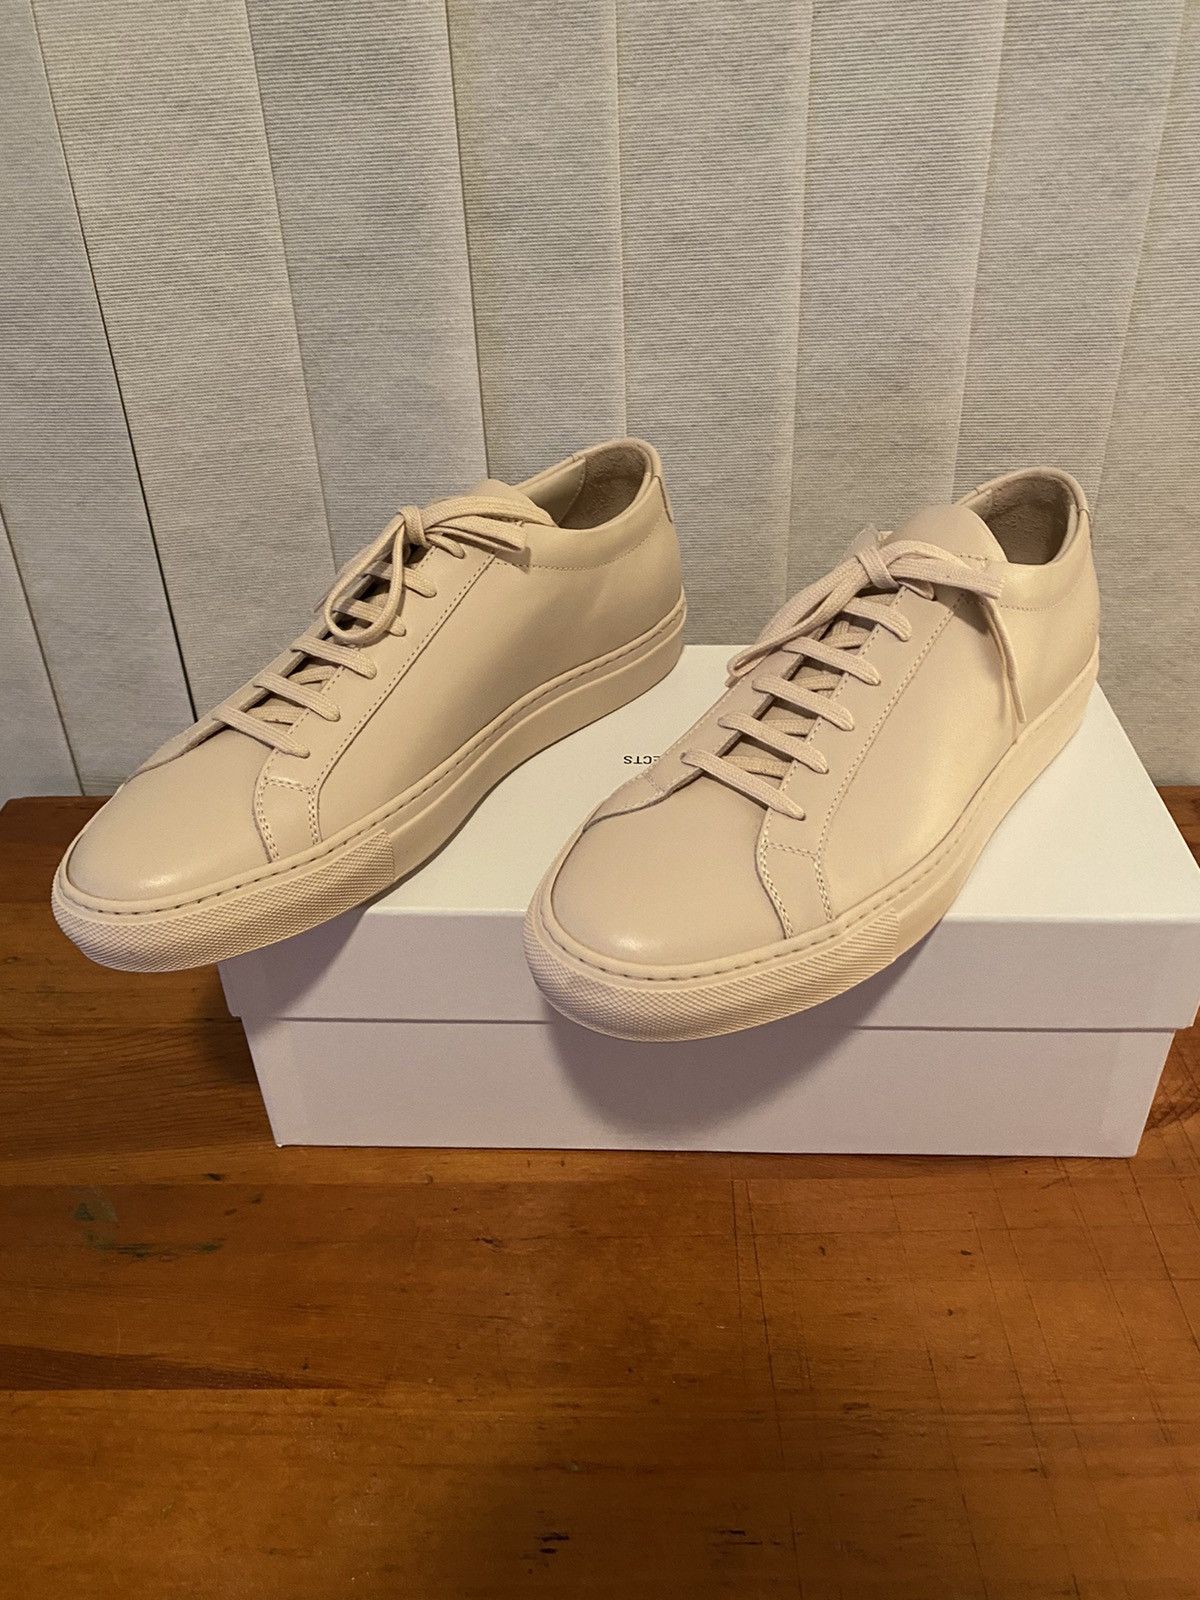 Common Projects Original Achilles Low Nude 0600 | Grailed